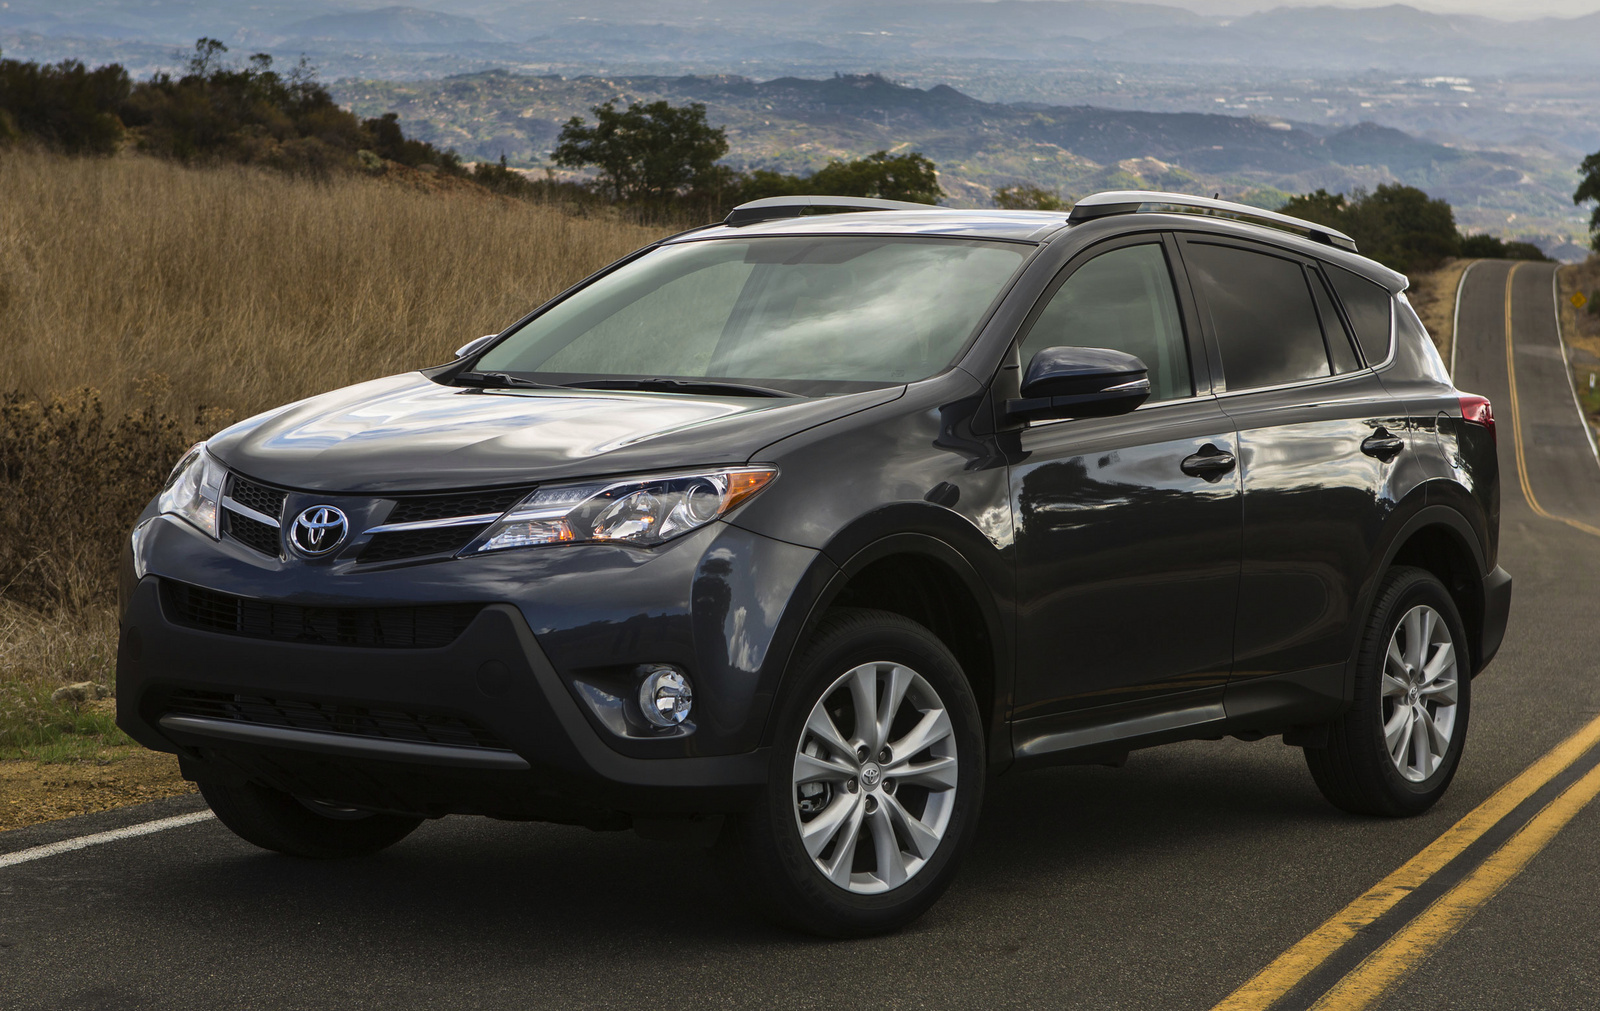 2014 Toyota RAV4 Test Drive Review summaryImage